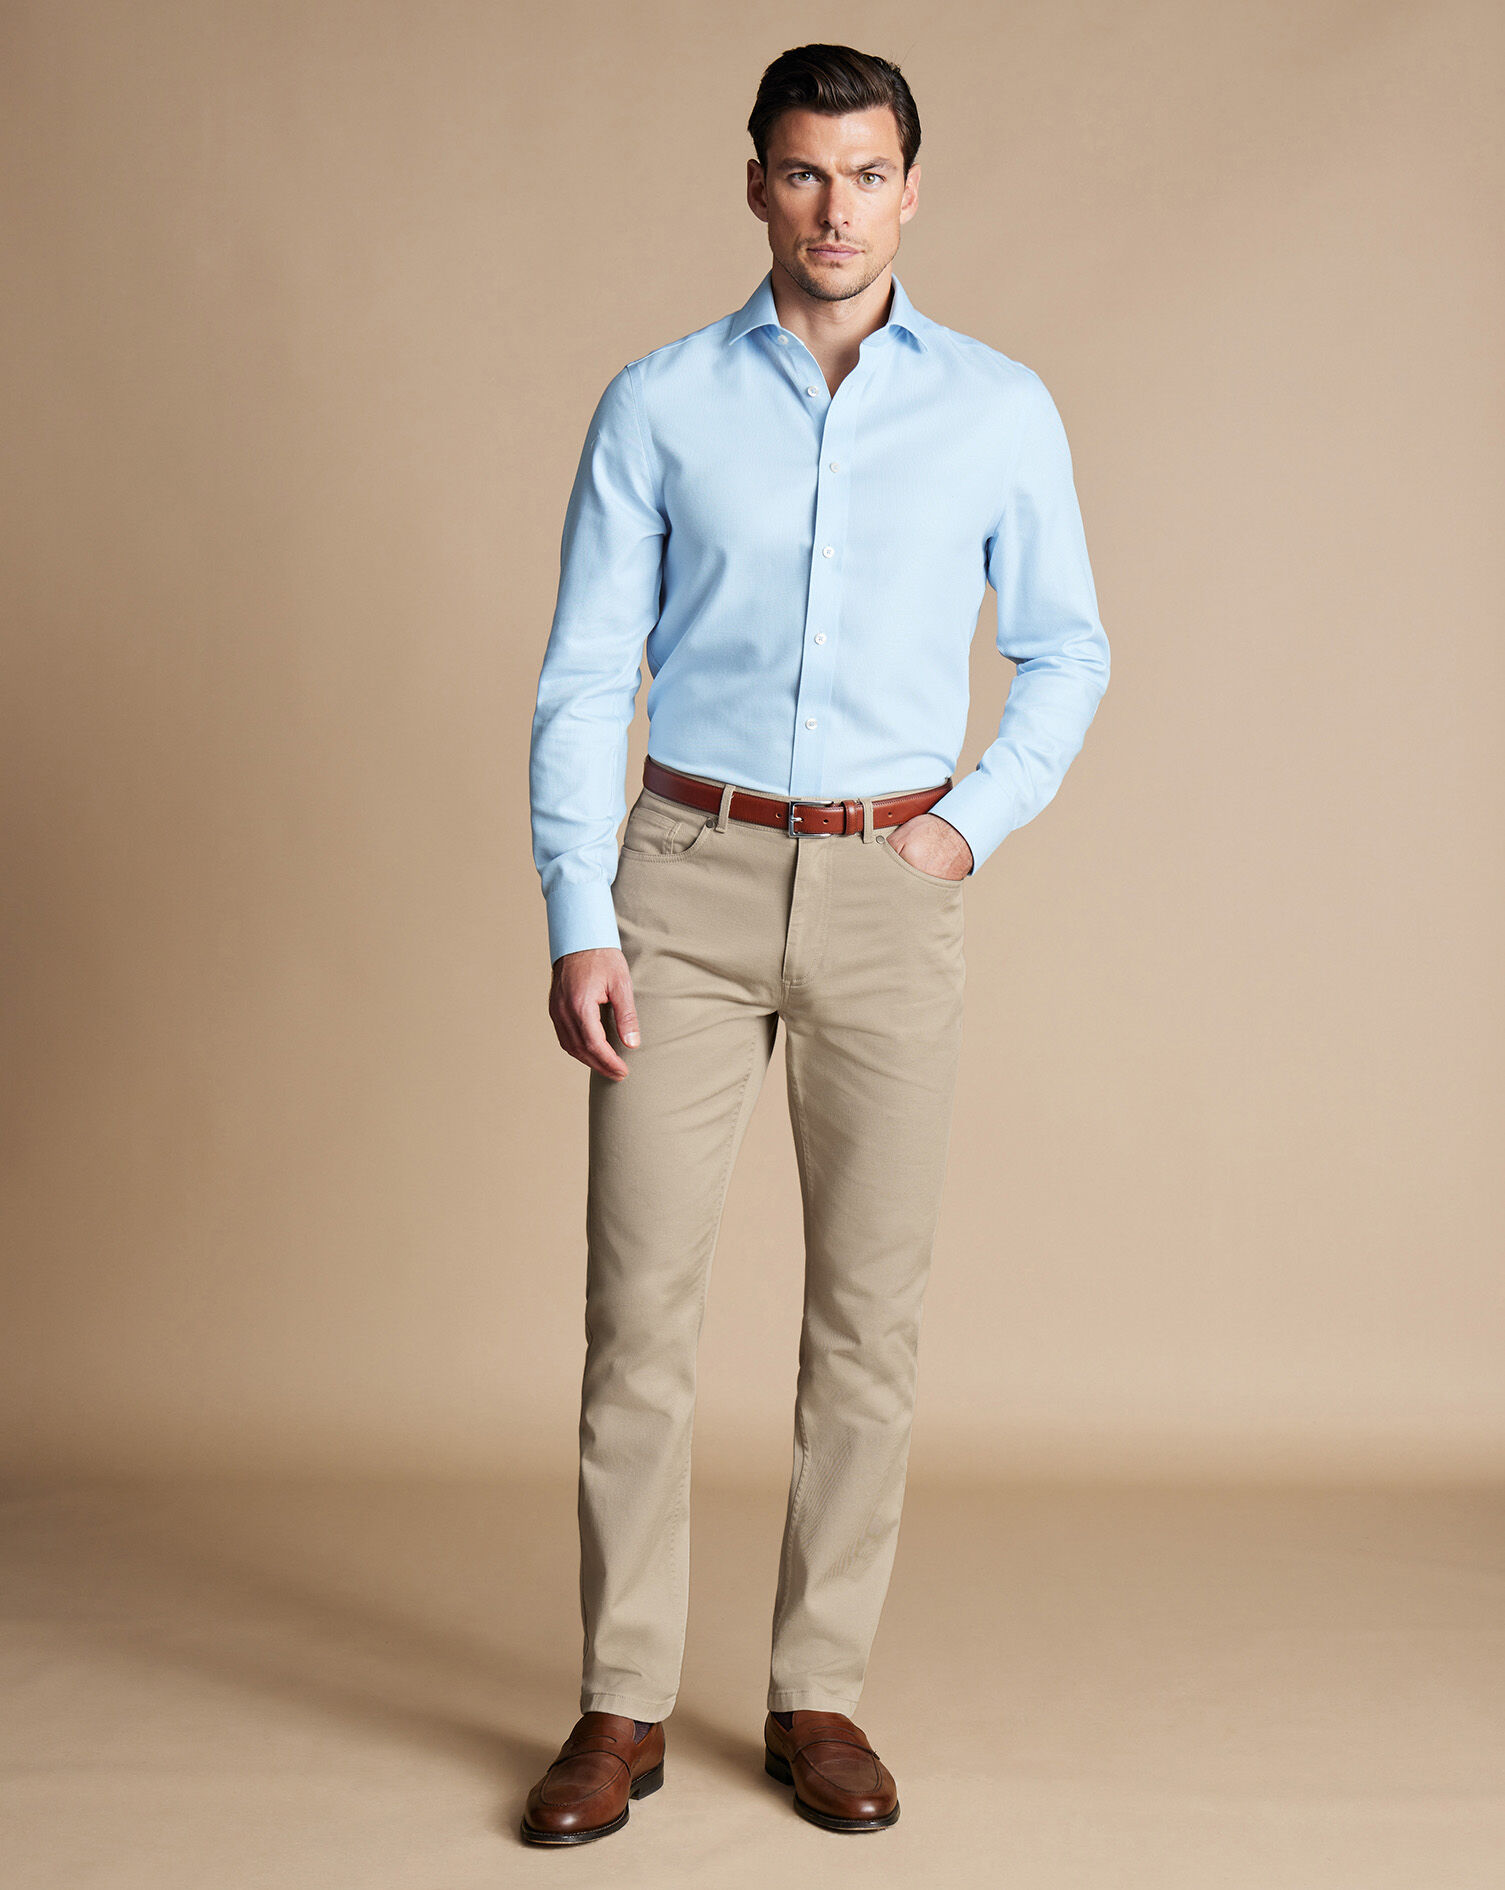 Would wearing khaki pants with a solid color T-shirt look right? - Quora